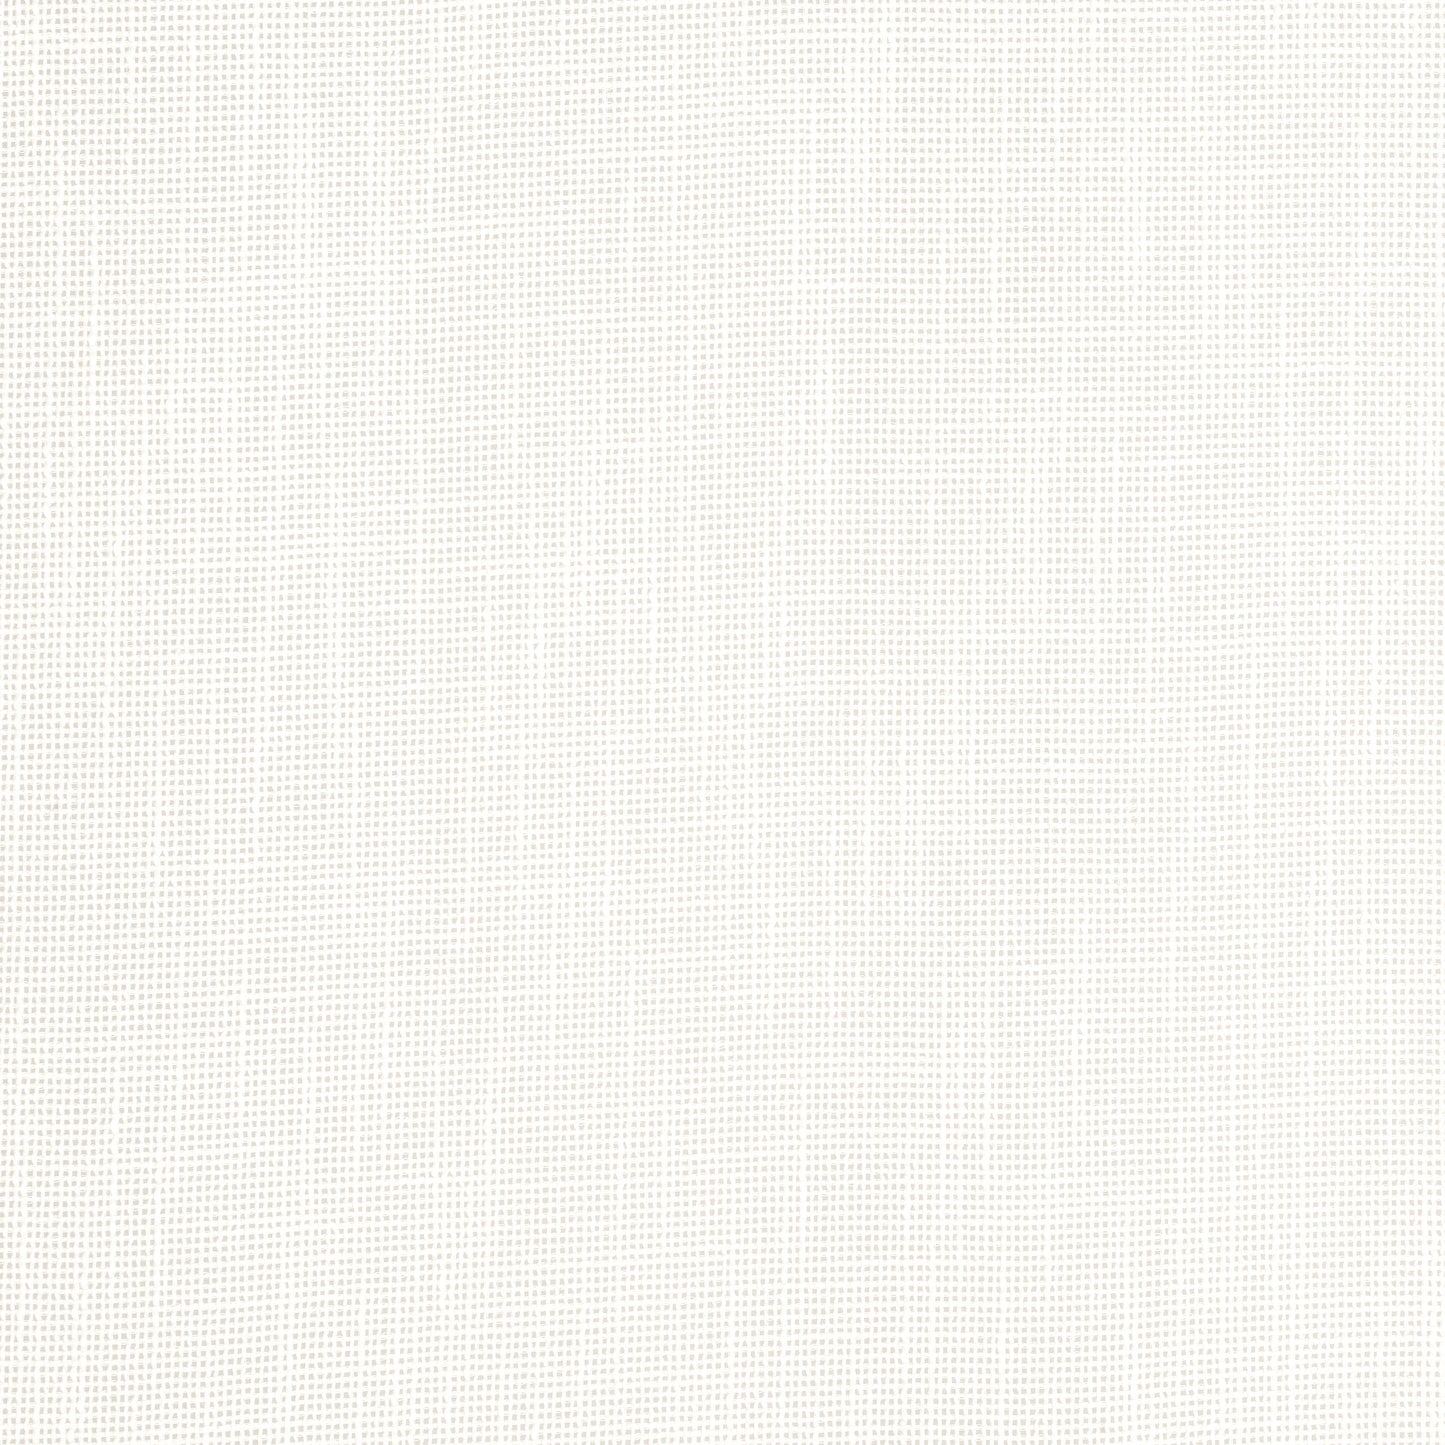 Purchase Thibaut Fabric Product FWW8226 pattern name Mistral color Ivory